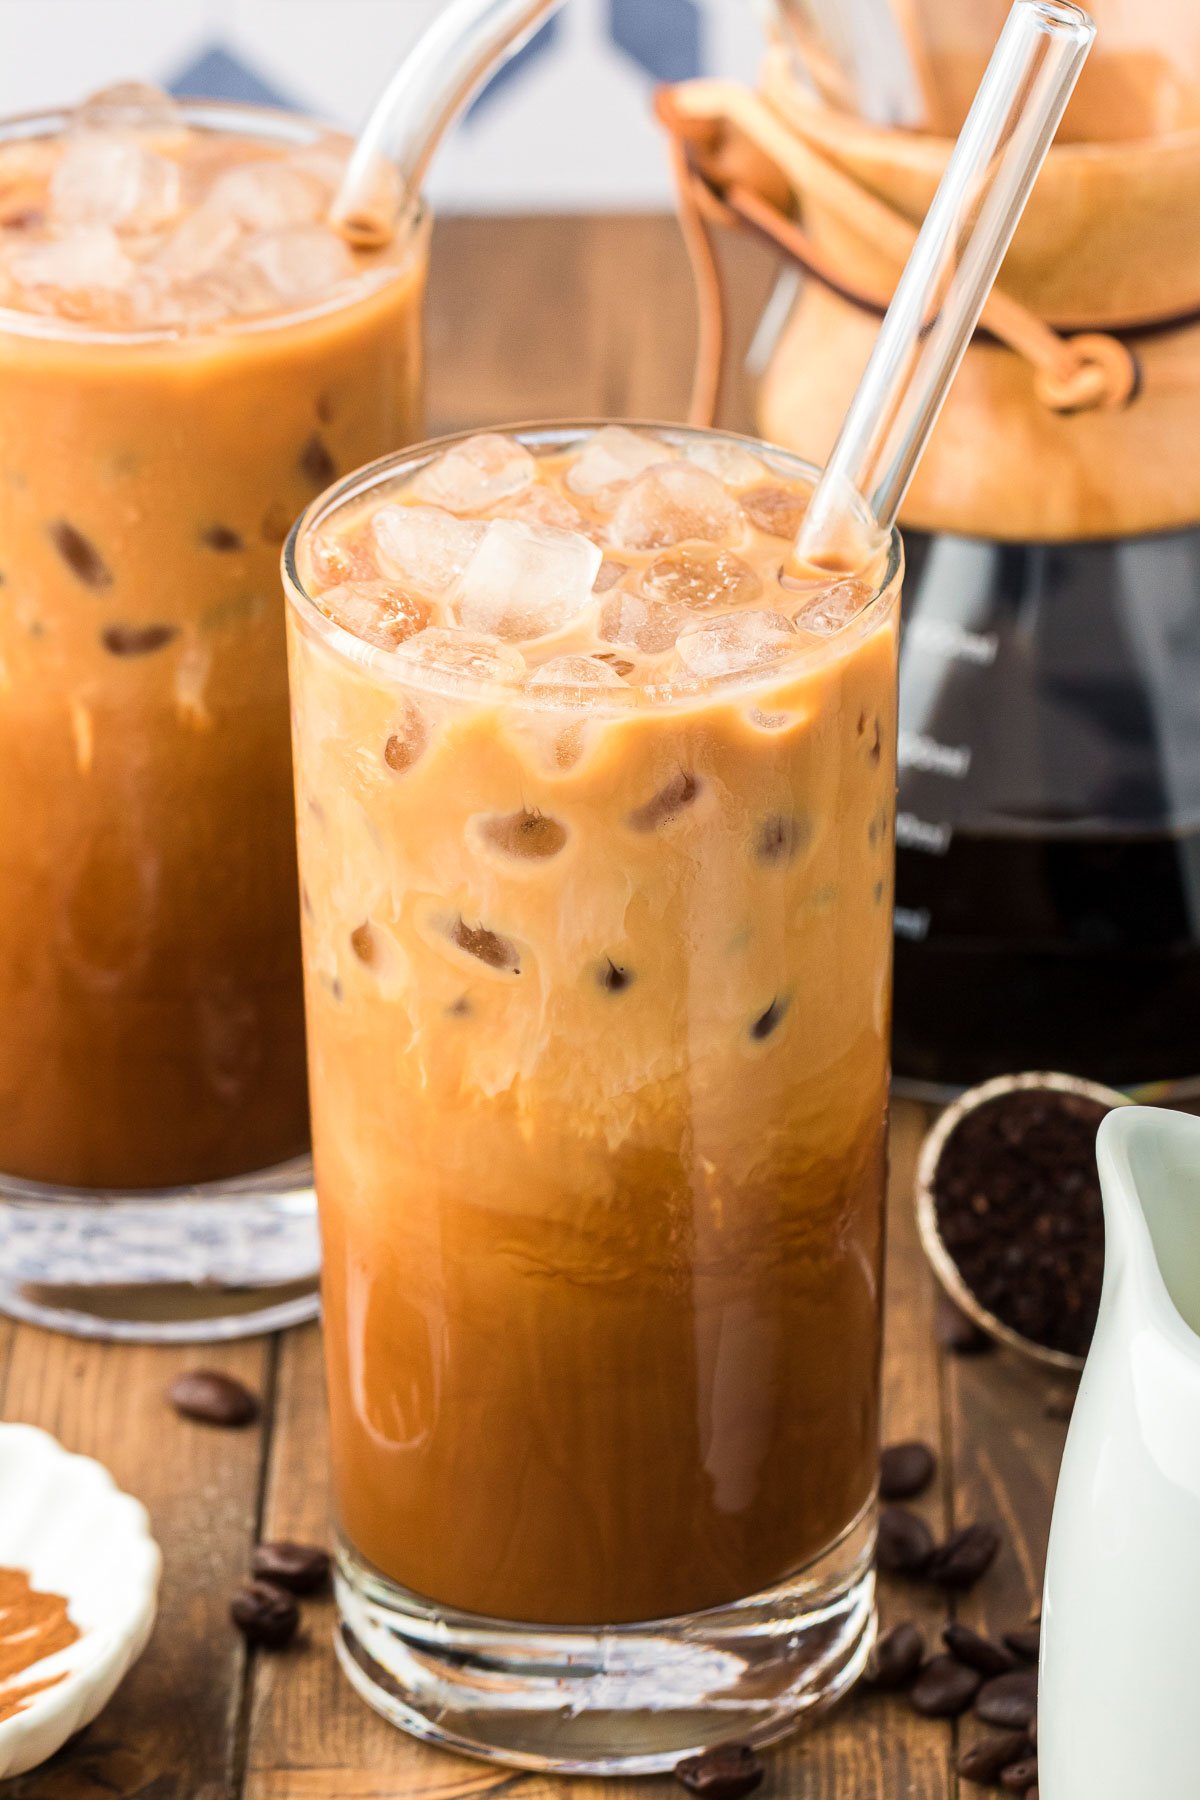 Glasses of Thai iced coffee on a wooden table.